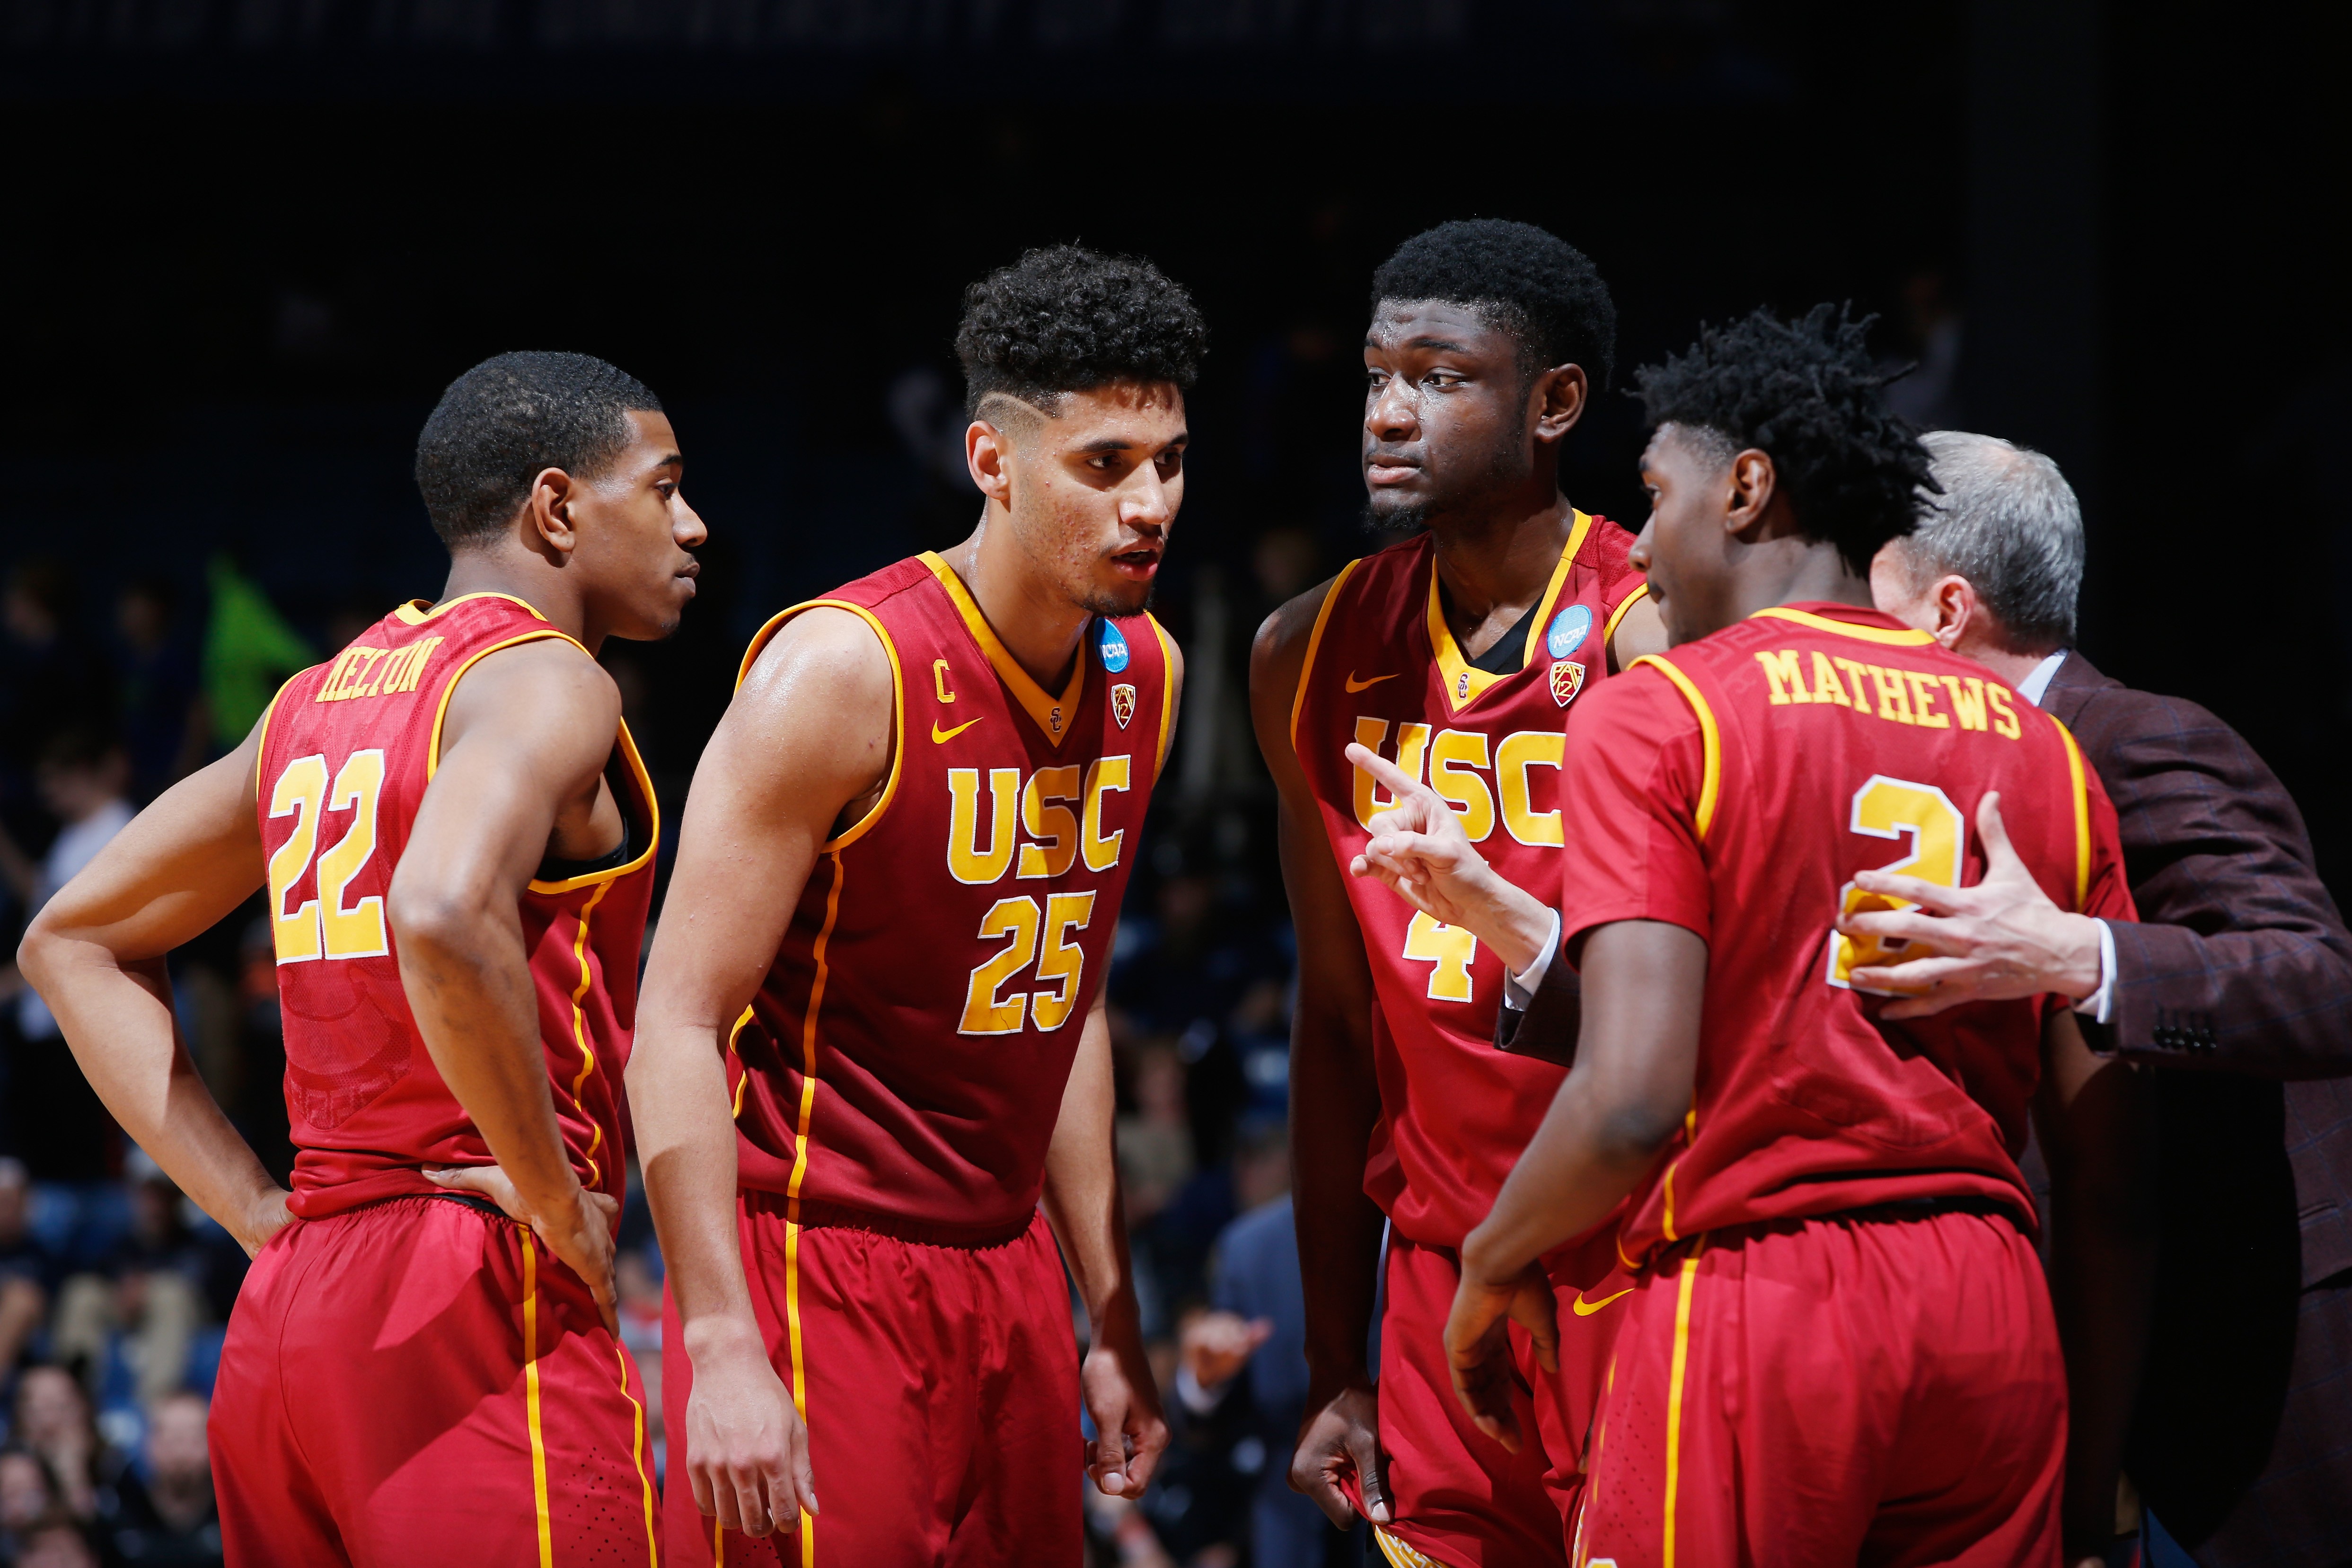 USC Basketball 2017-18 schedule announced